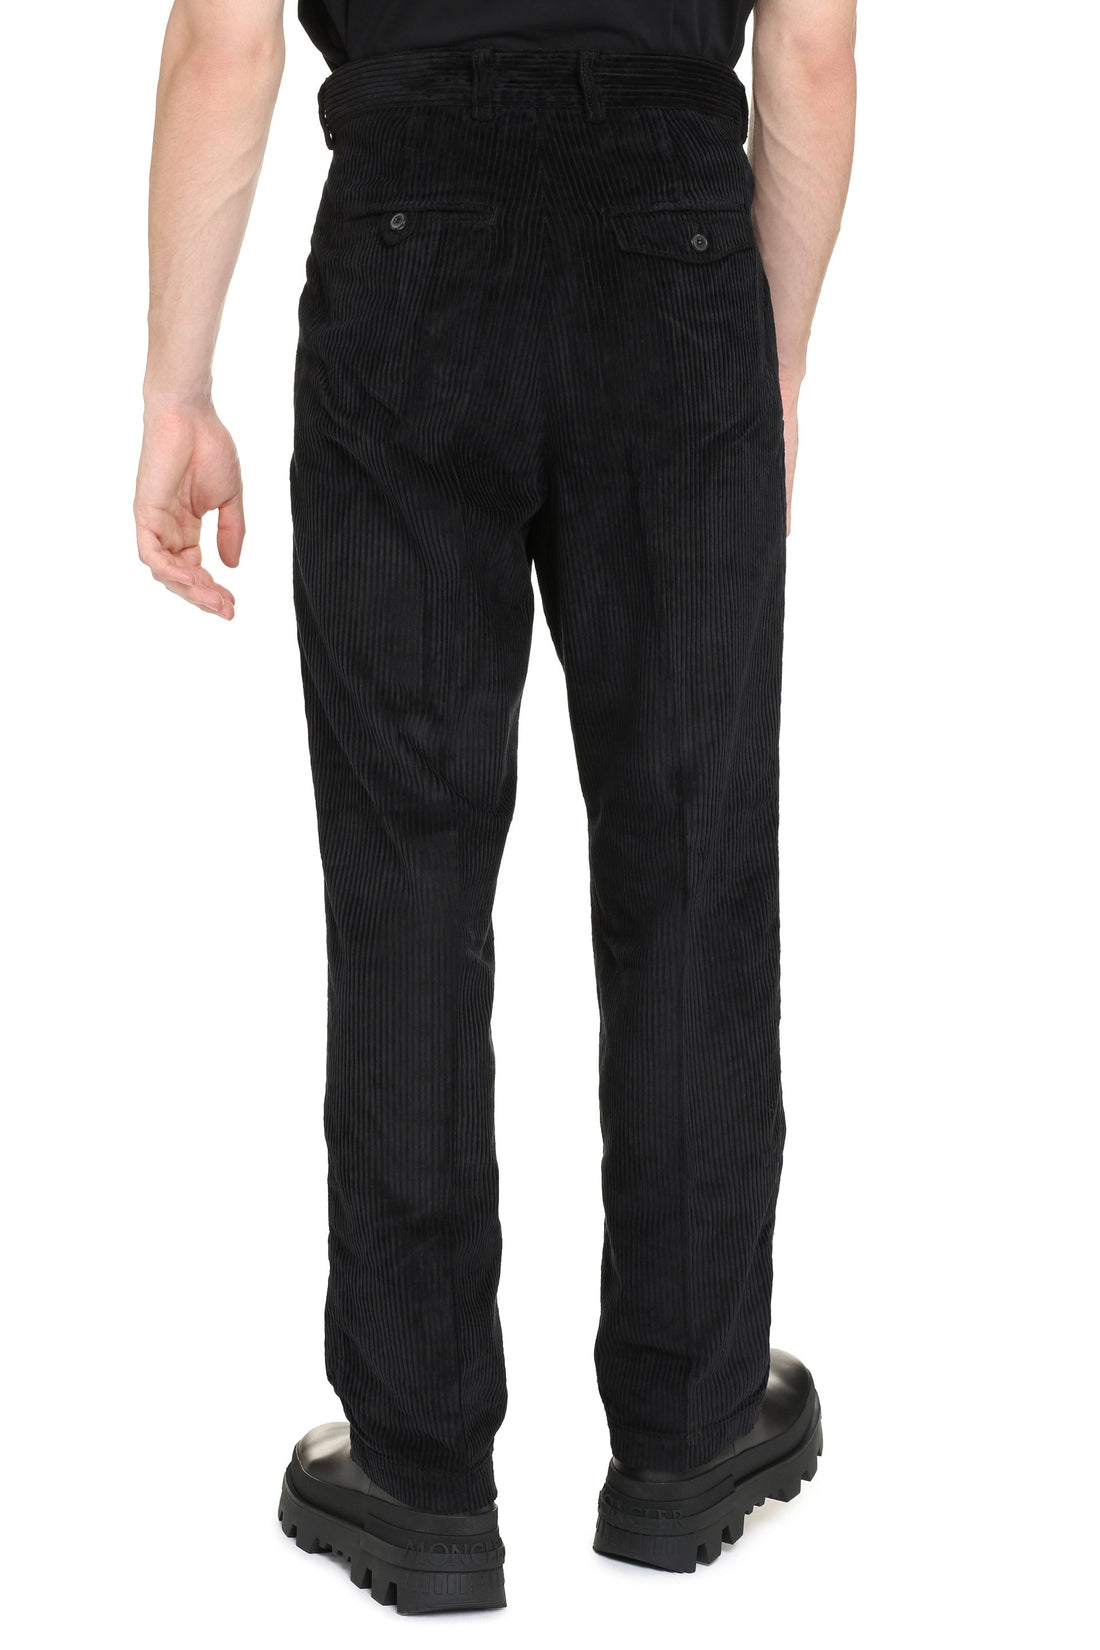 Our Legacy-OUTLET-SALE-Chino 22 corduroy trousers-ARCHIVIST